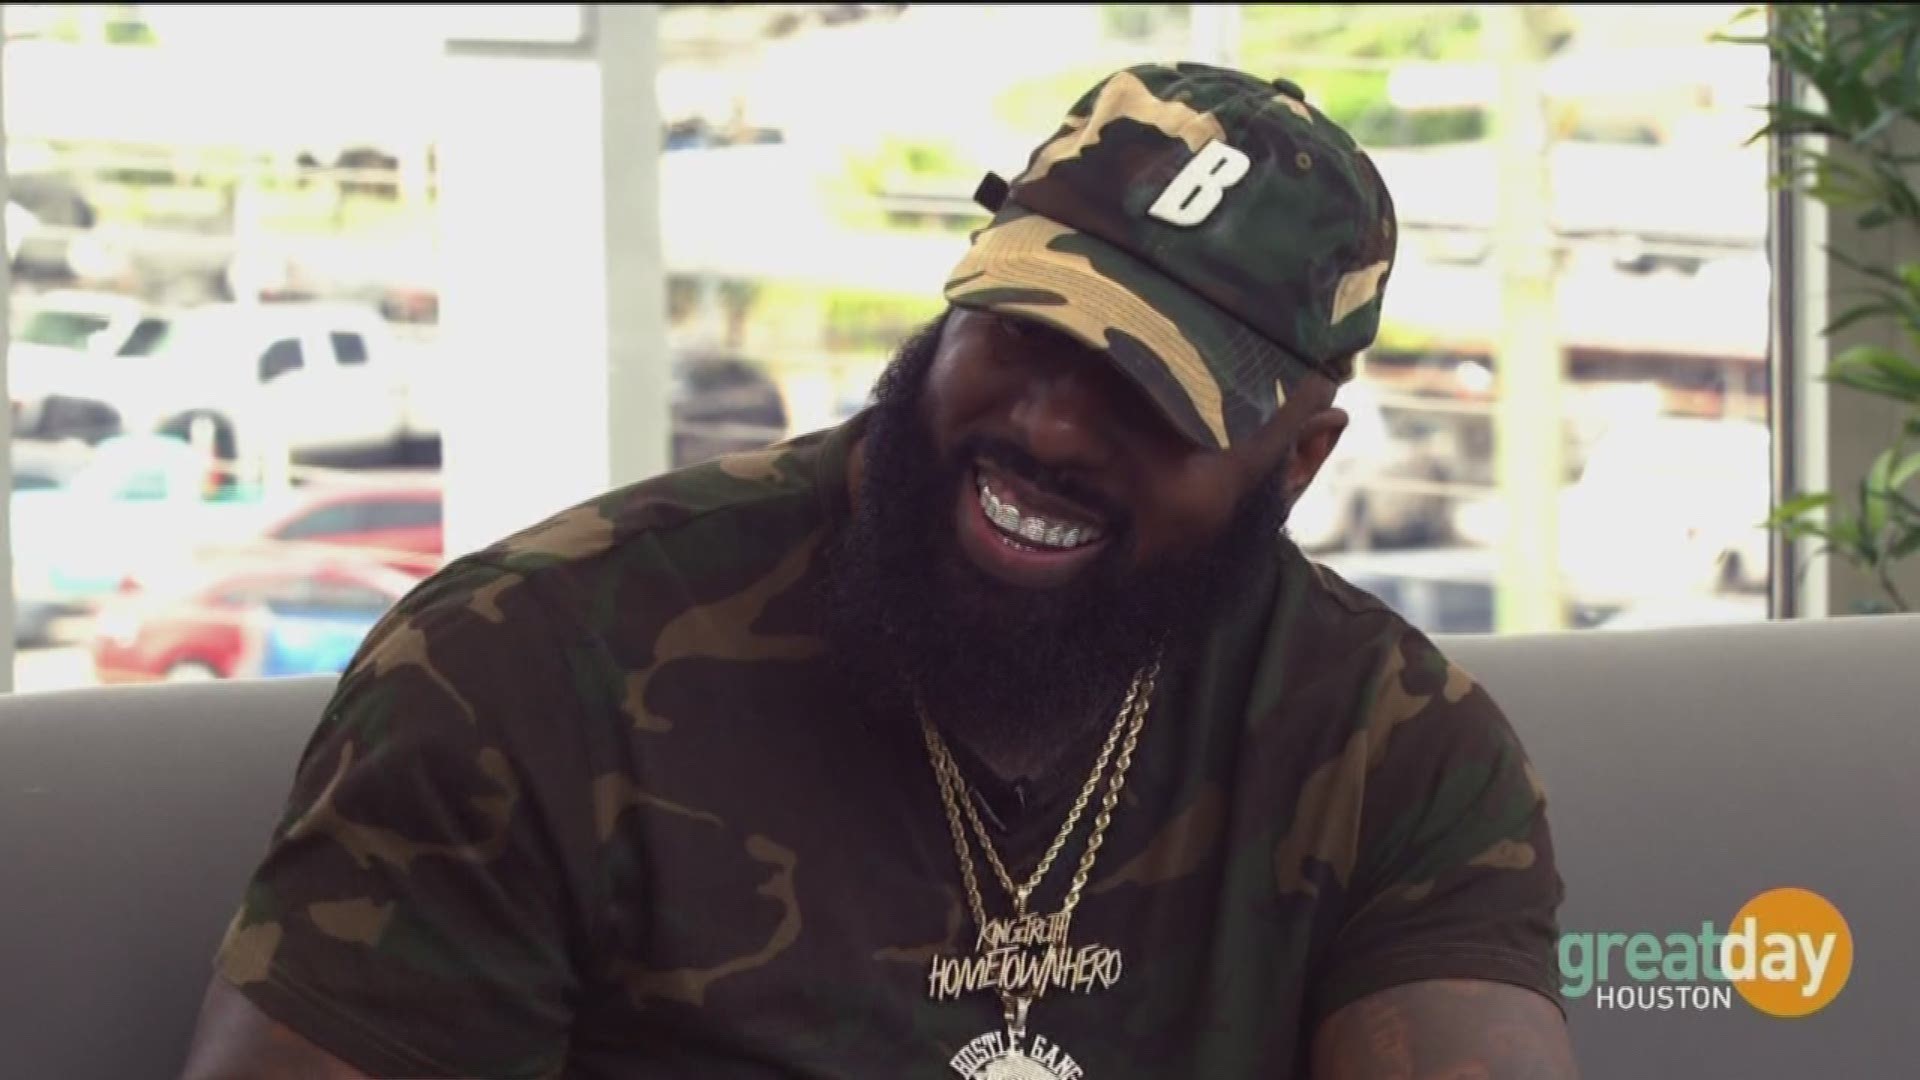 Deborah "raps" it up with Trae Tha Truth to discuss the 11th annual Trae Day held every July 22nd. 